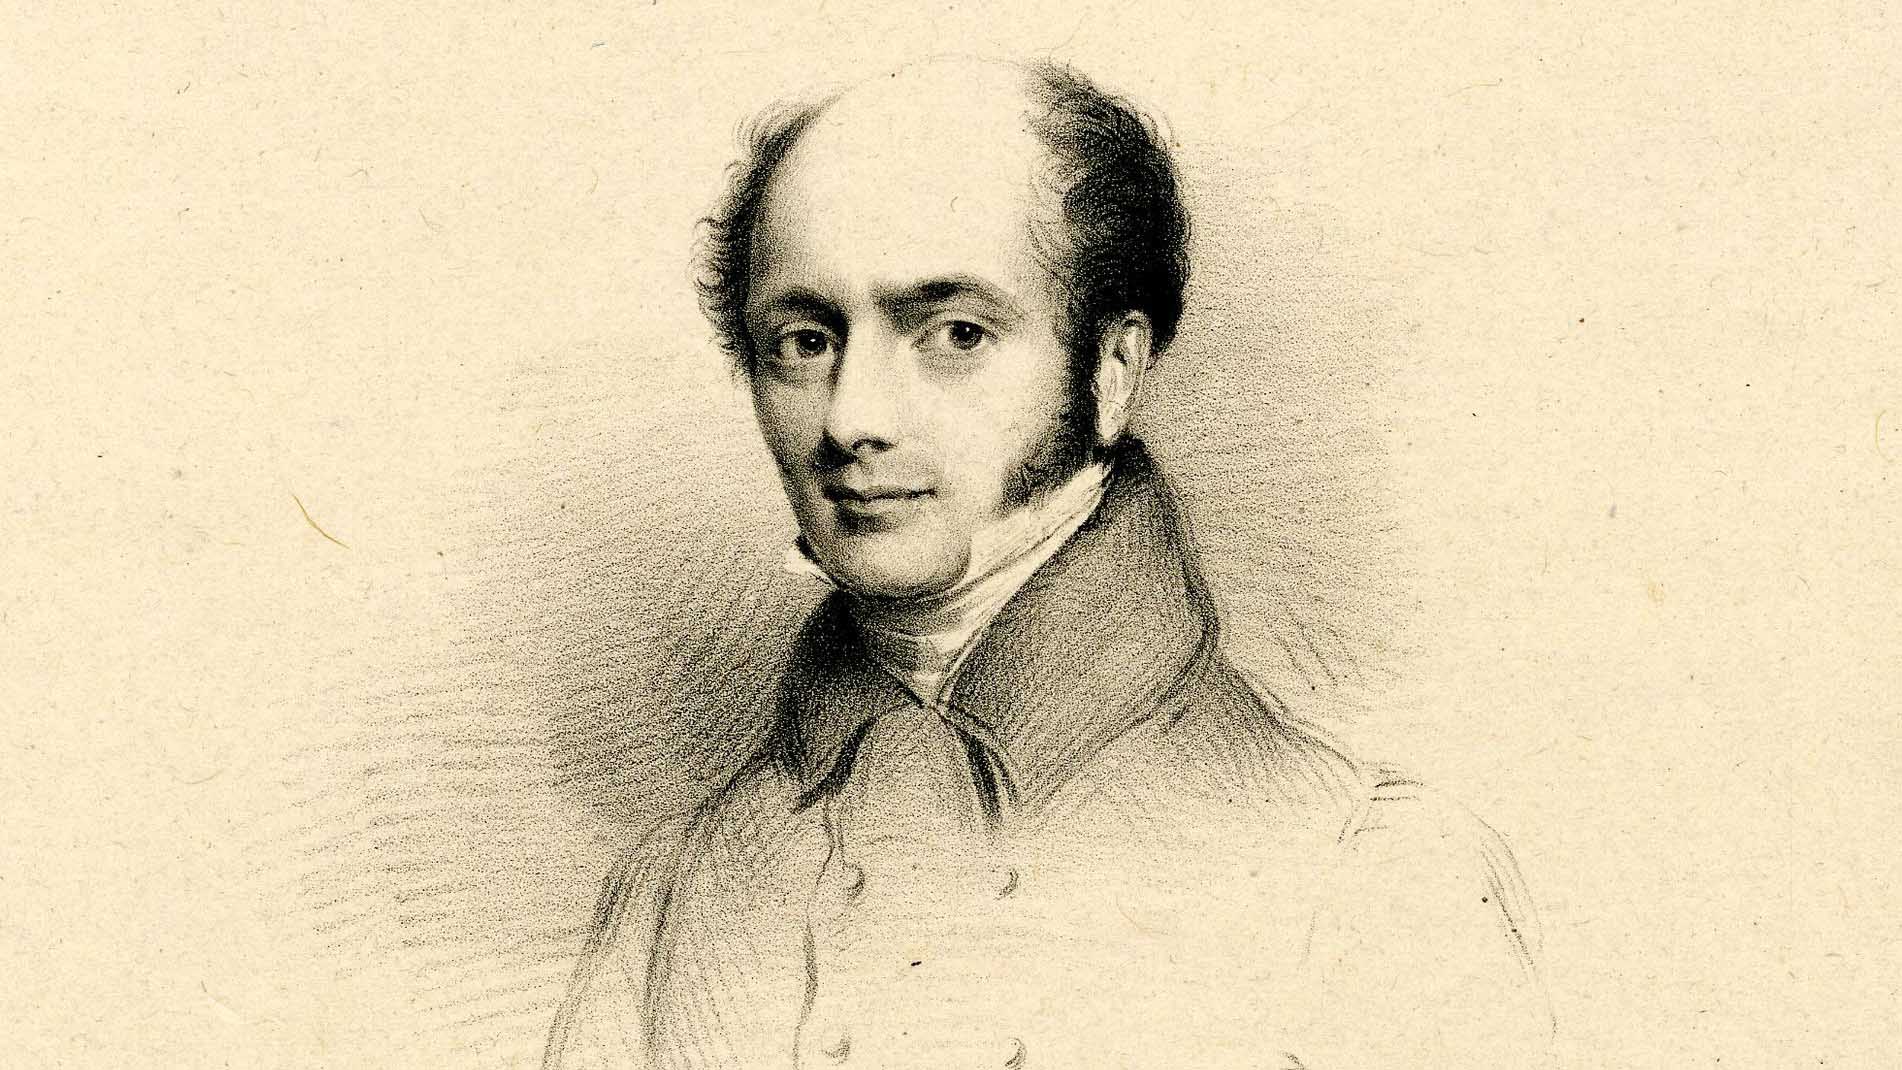 Lithograph portrait of William Wyon in 1835.